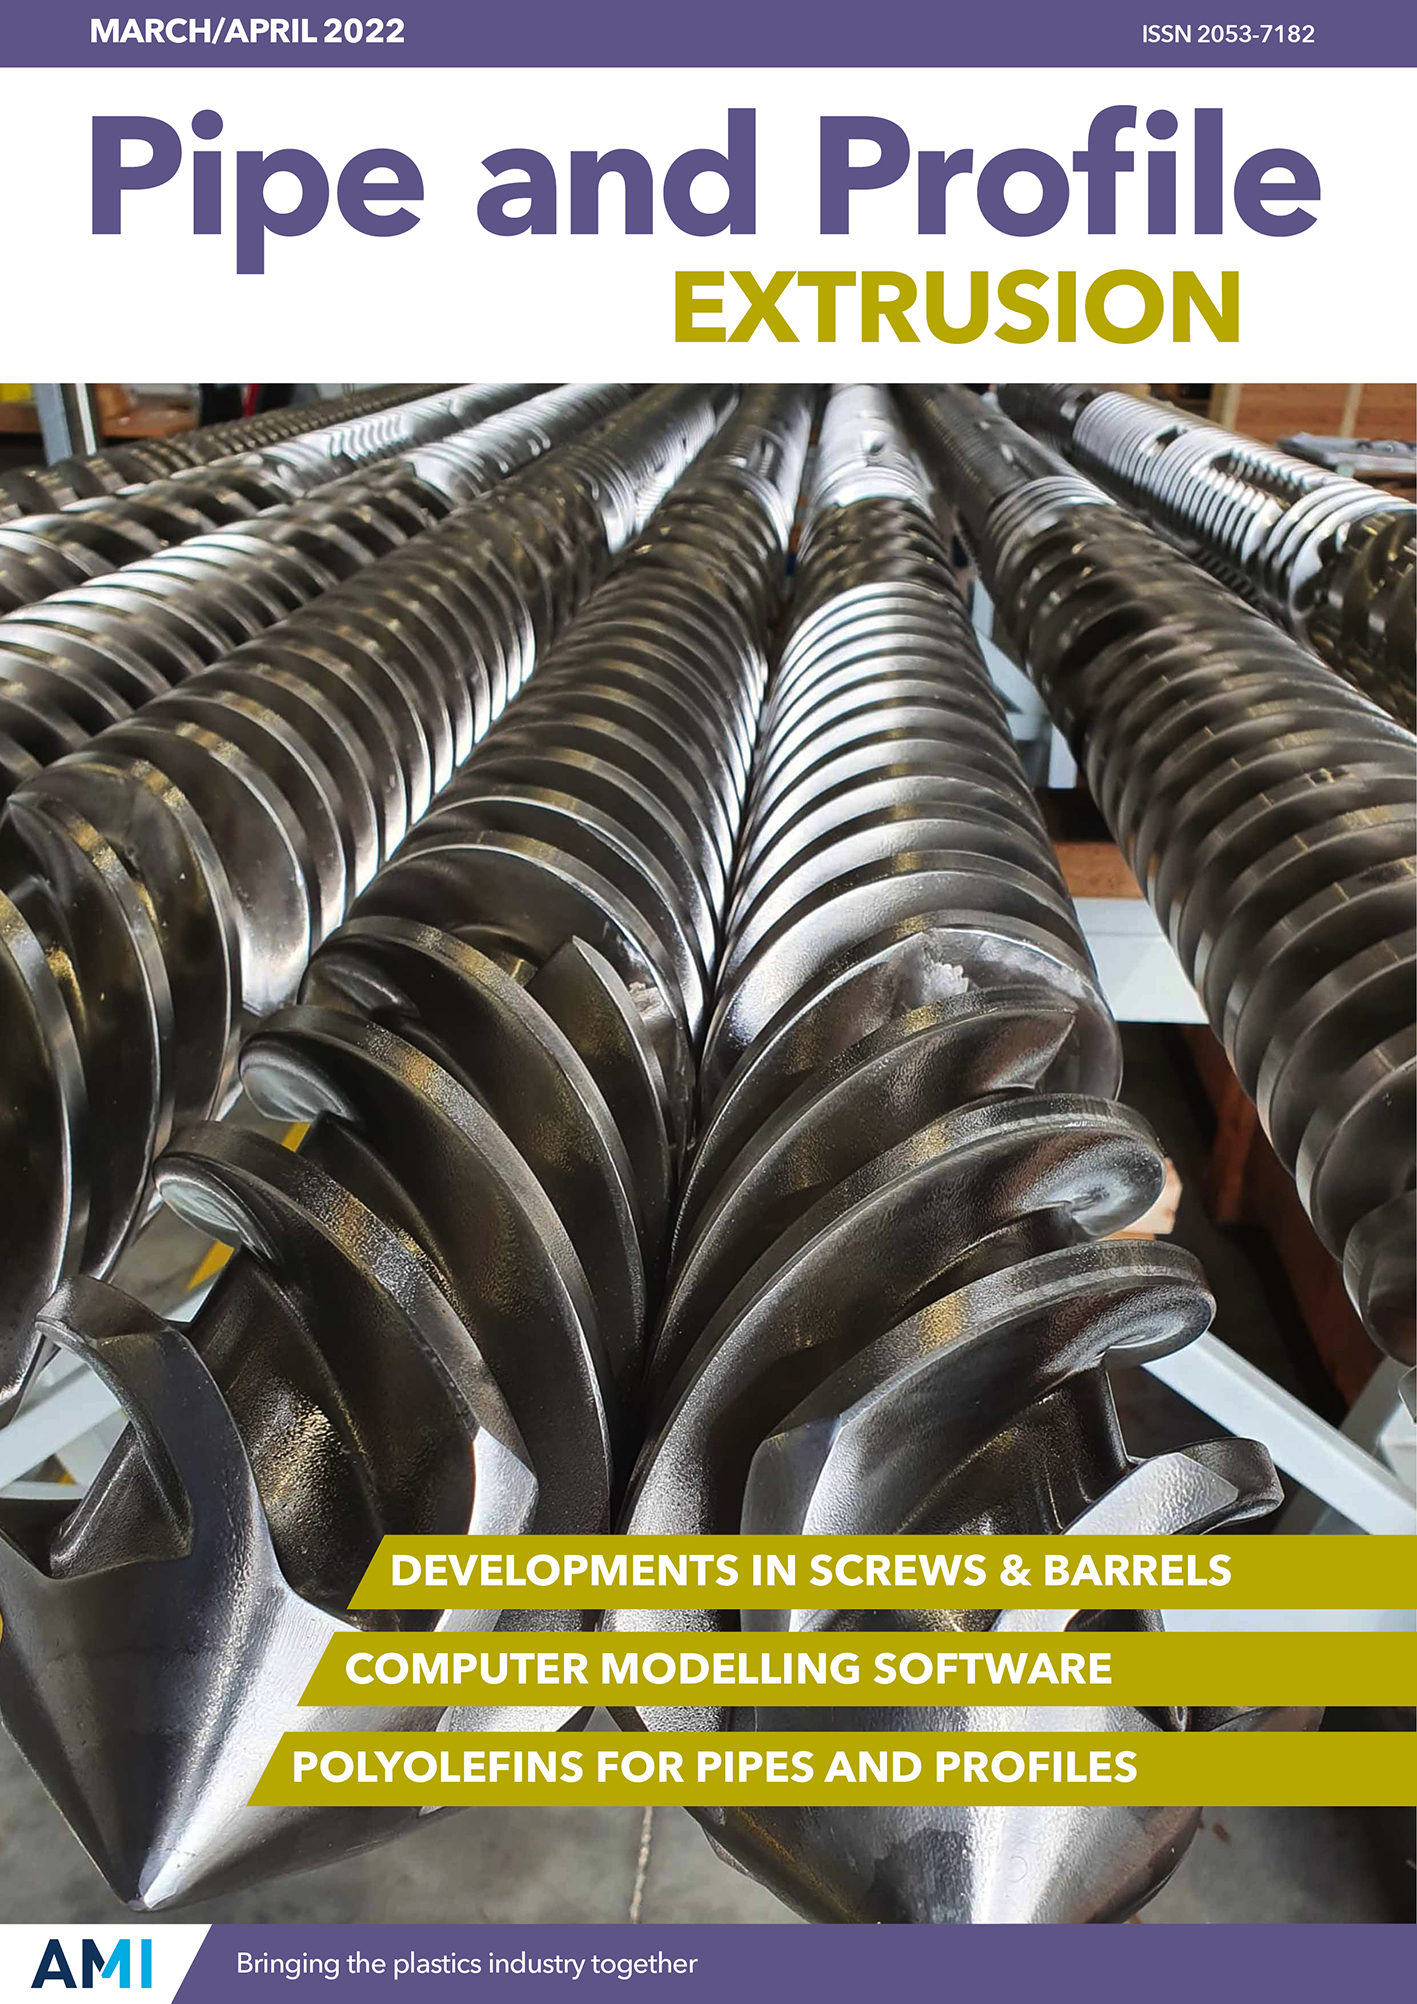 Pipe and Profile Extrusion March/April 2022